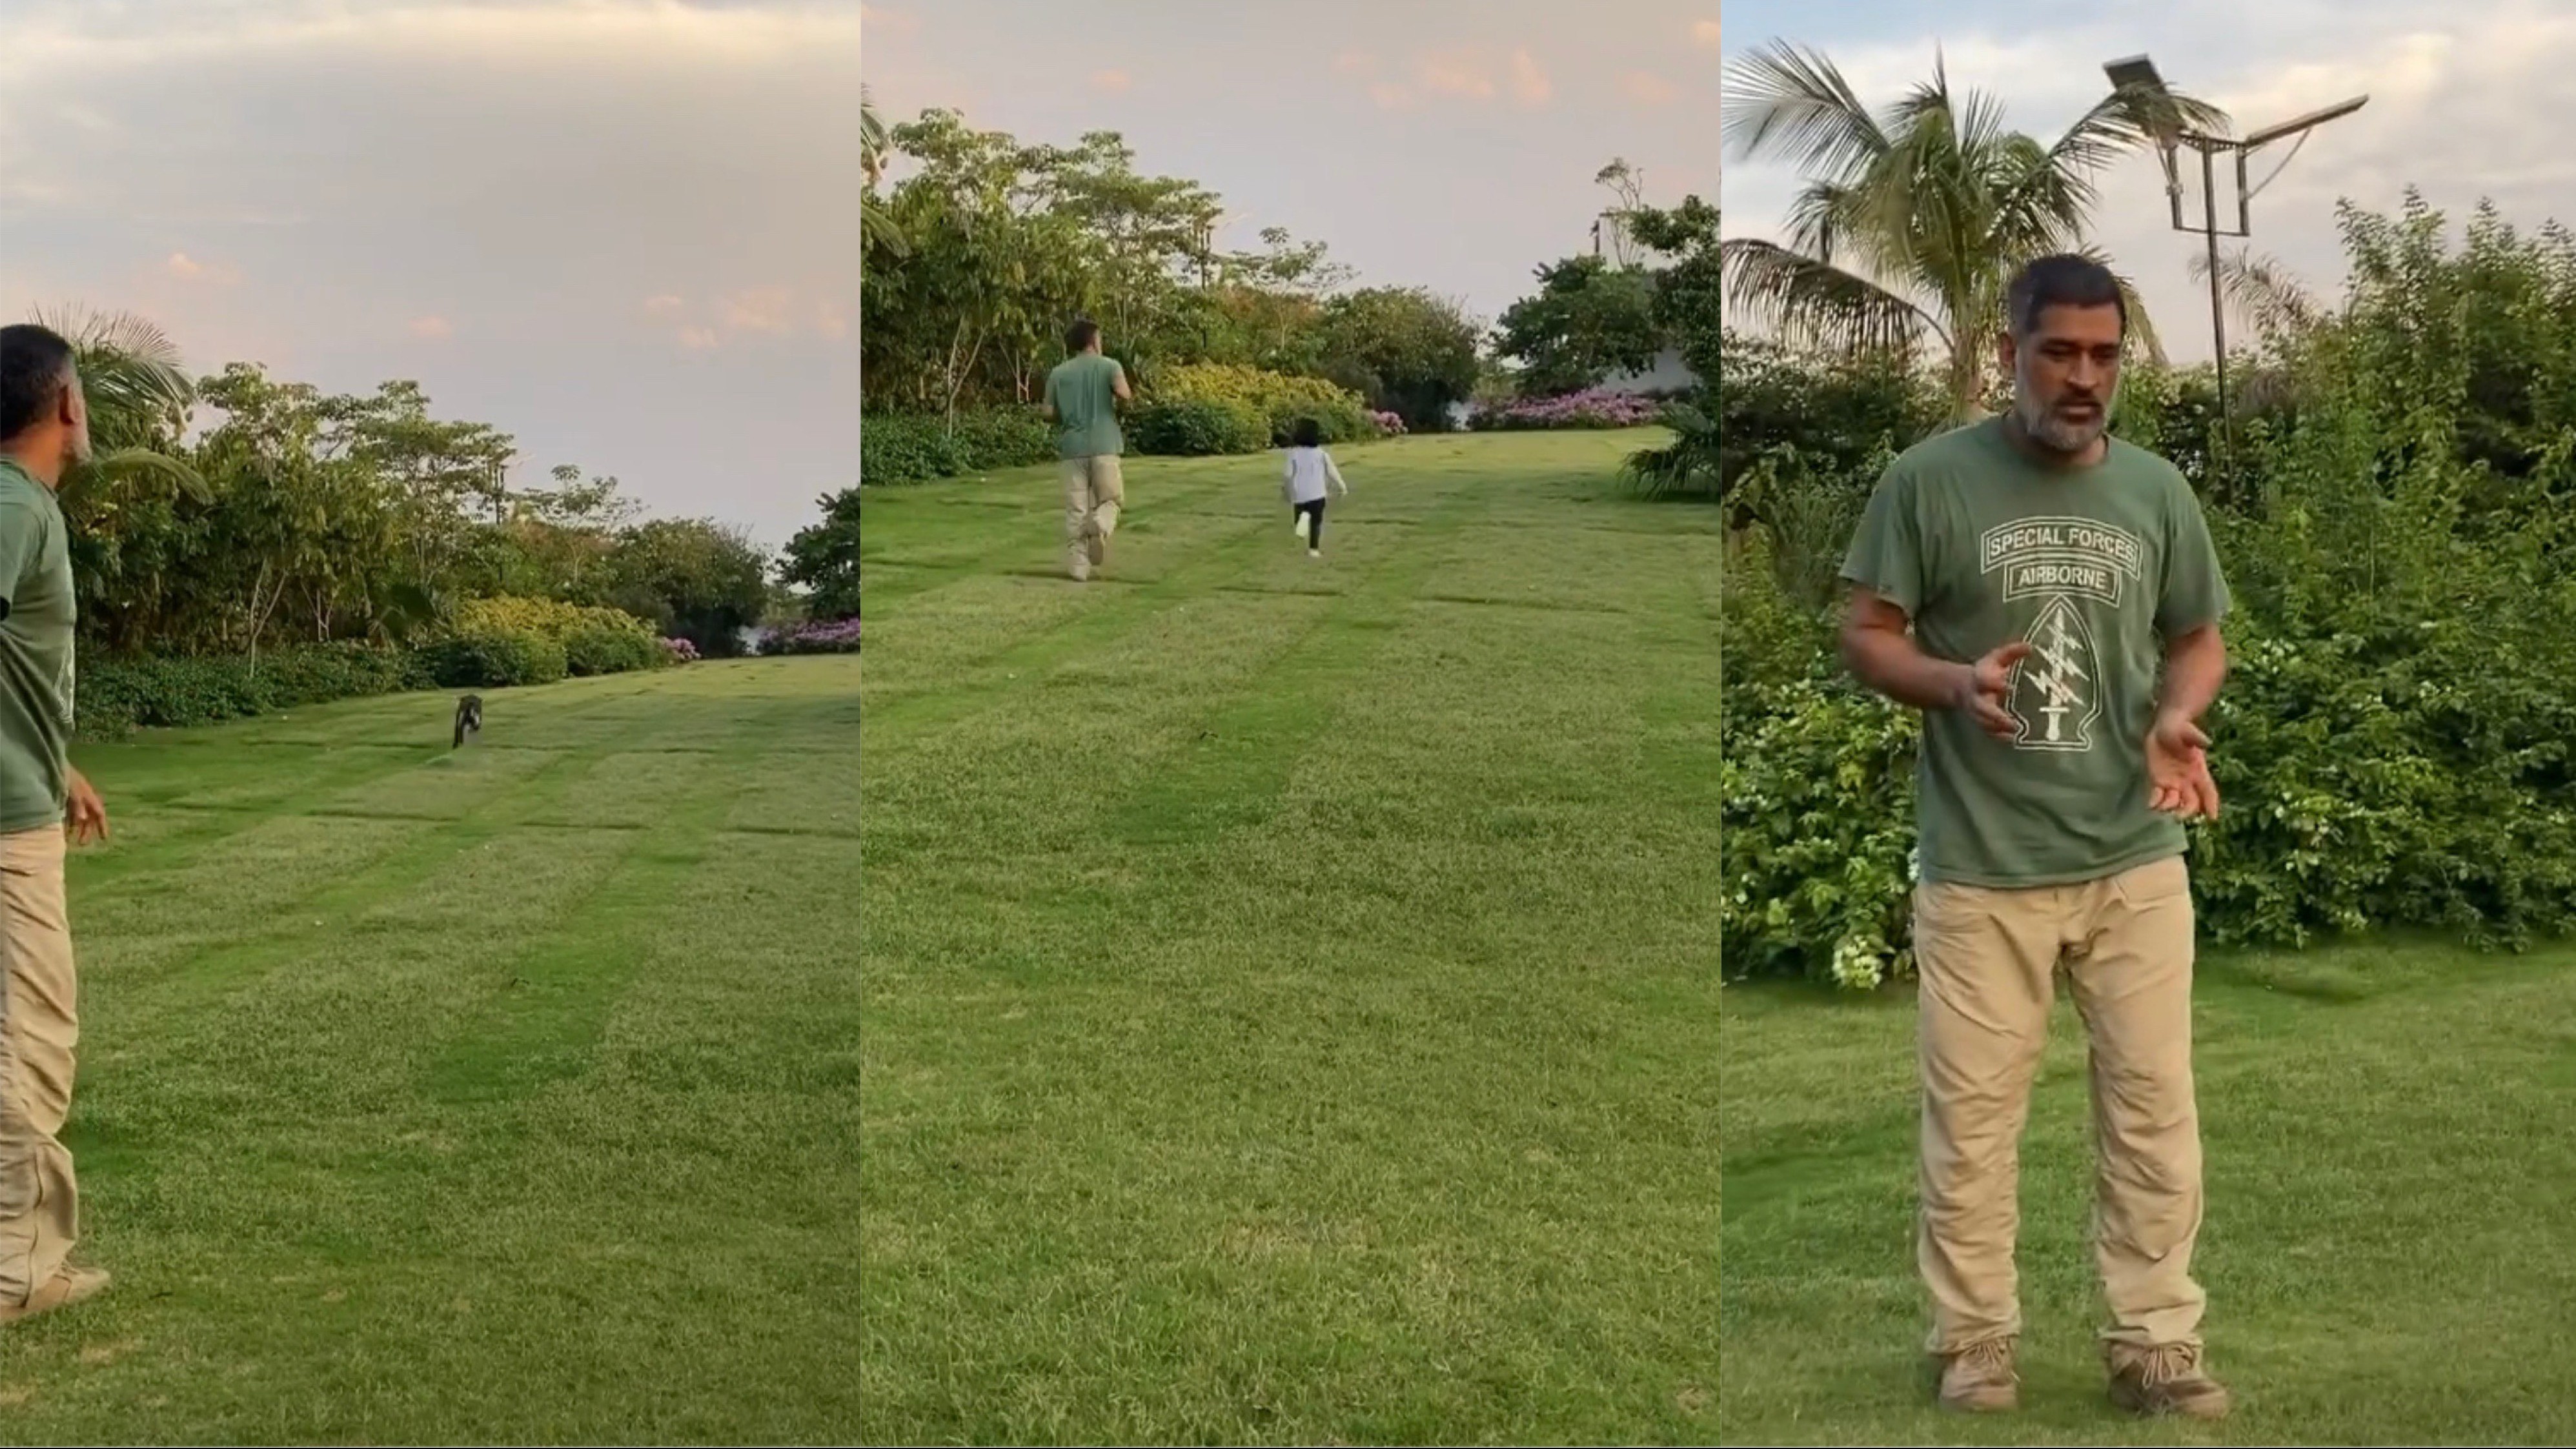 WATCH: MS Dhoni goes for a run with Ziva; plays with pet dog at farmhouse